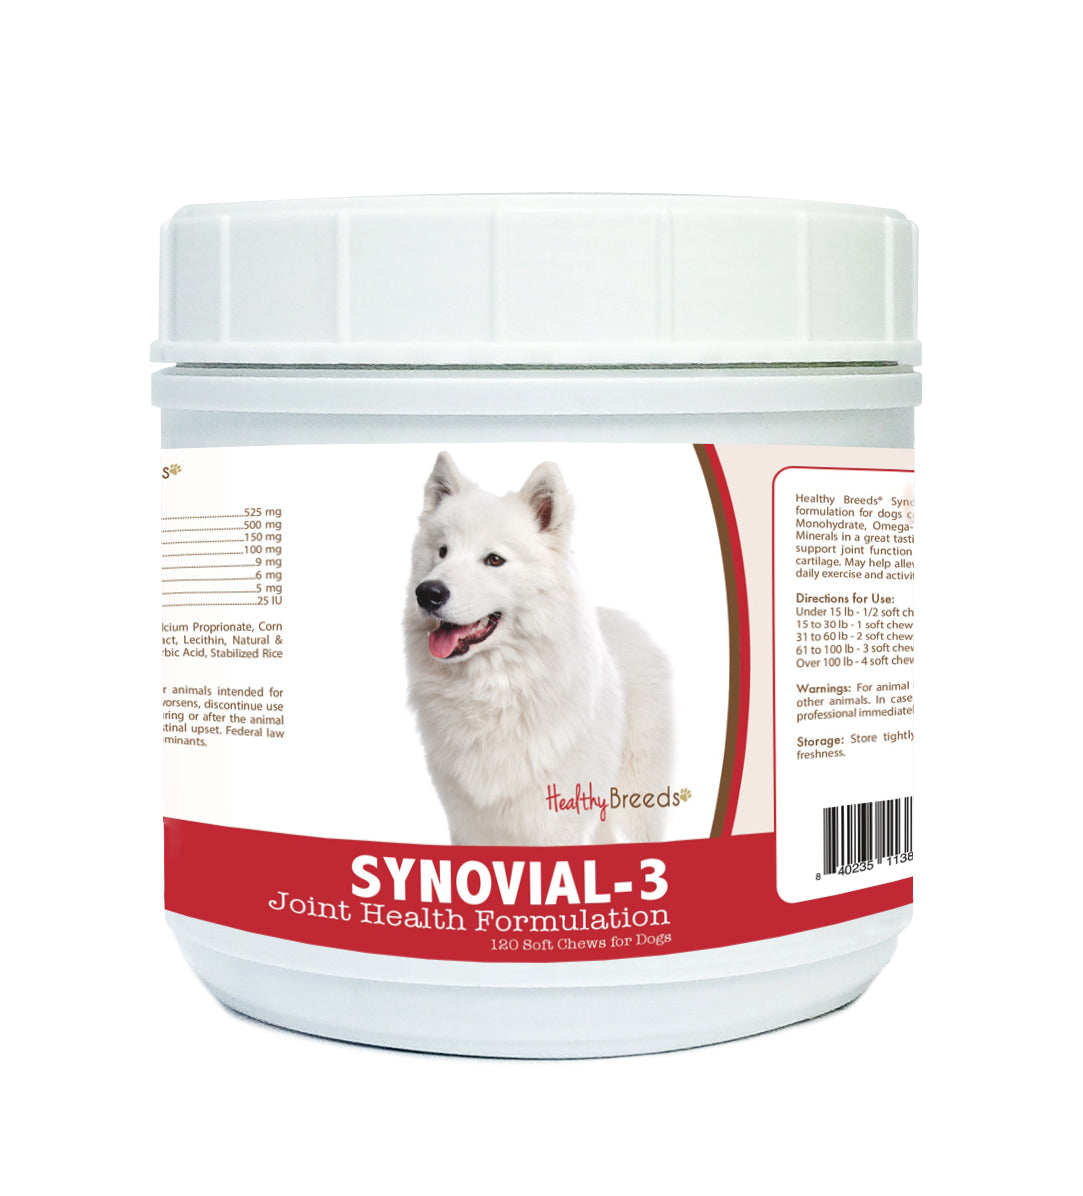 Samoyed Synovial-3 Joint Health Formulation Soft Chews 120 Count